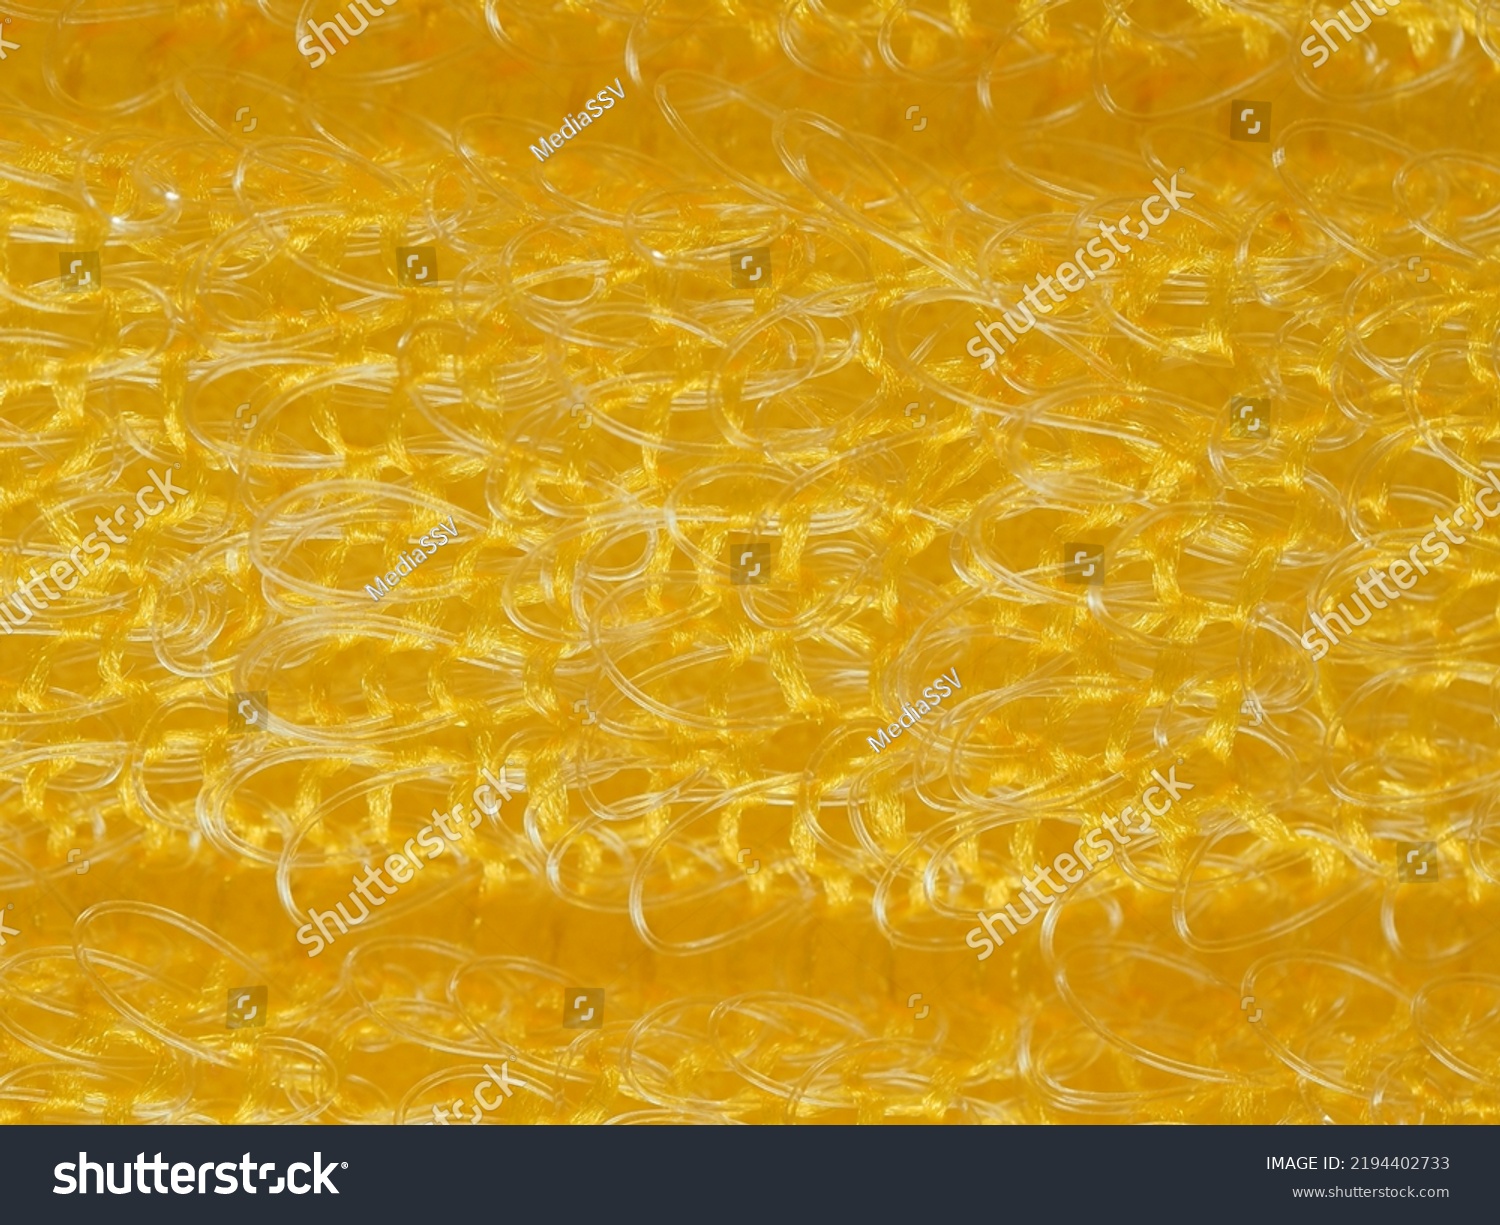 close up, background, texture, large horizontal banner. heterogeneous surface structure bright saturated yellow sponge for washing dishes, kitchen, bath. full depth of field. high resolution photo #2194402733